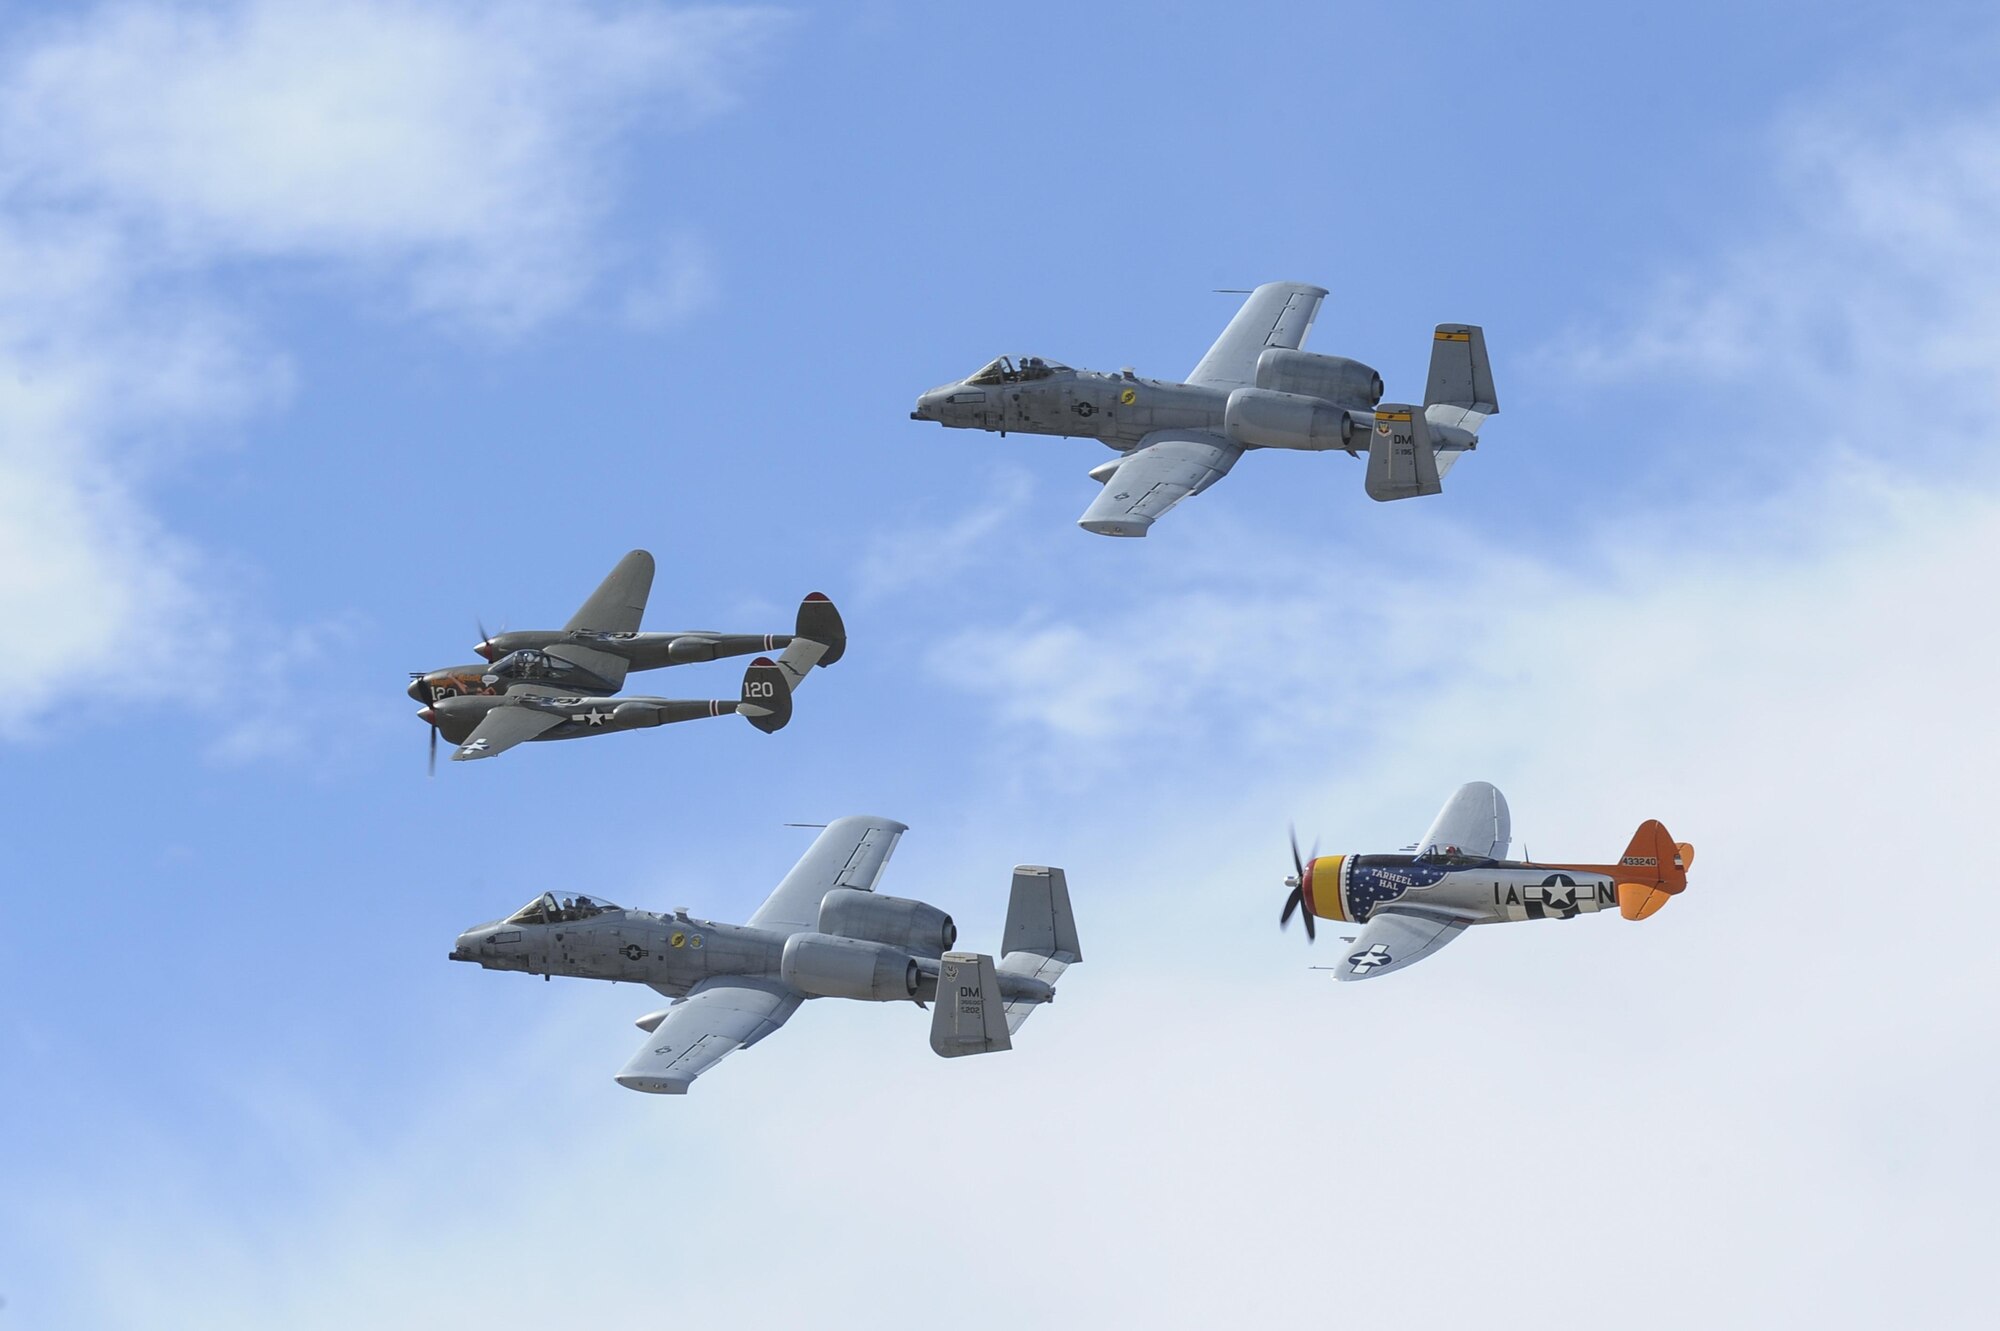 Two U.S. Air Force A-10C Thunderbolt IIs, a P-38 Lightning and a P-47 Thunderbolt fly in formation during the 2017 Heritage Flight Training and Certification Course at Davis-Monthan Air Force Base, Ariz., Feb. 12, 2017. The modern aircraft that participated in this year's HFTCC were the F-35 Lightning II, the F-22 Raptor, F-16 Fighting Falcon and the A-10C Thunderbolt II. (U.S. Air Force photo by Airman 1st Class Mya M. Crosby)